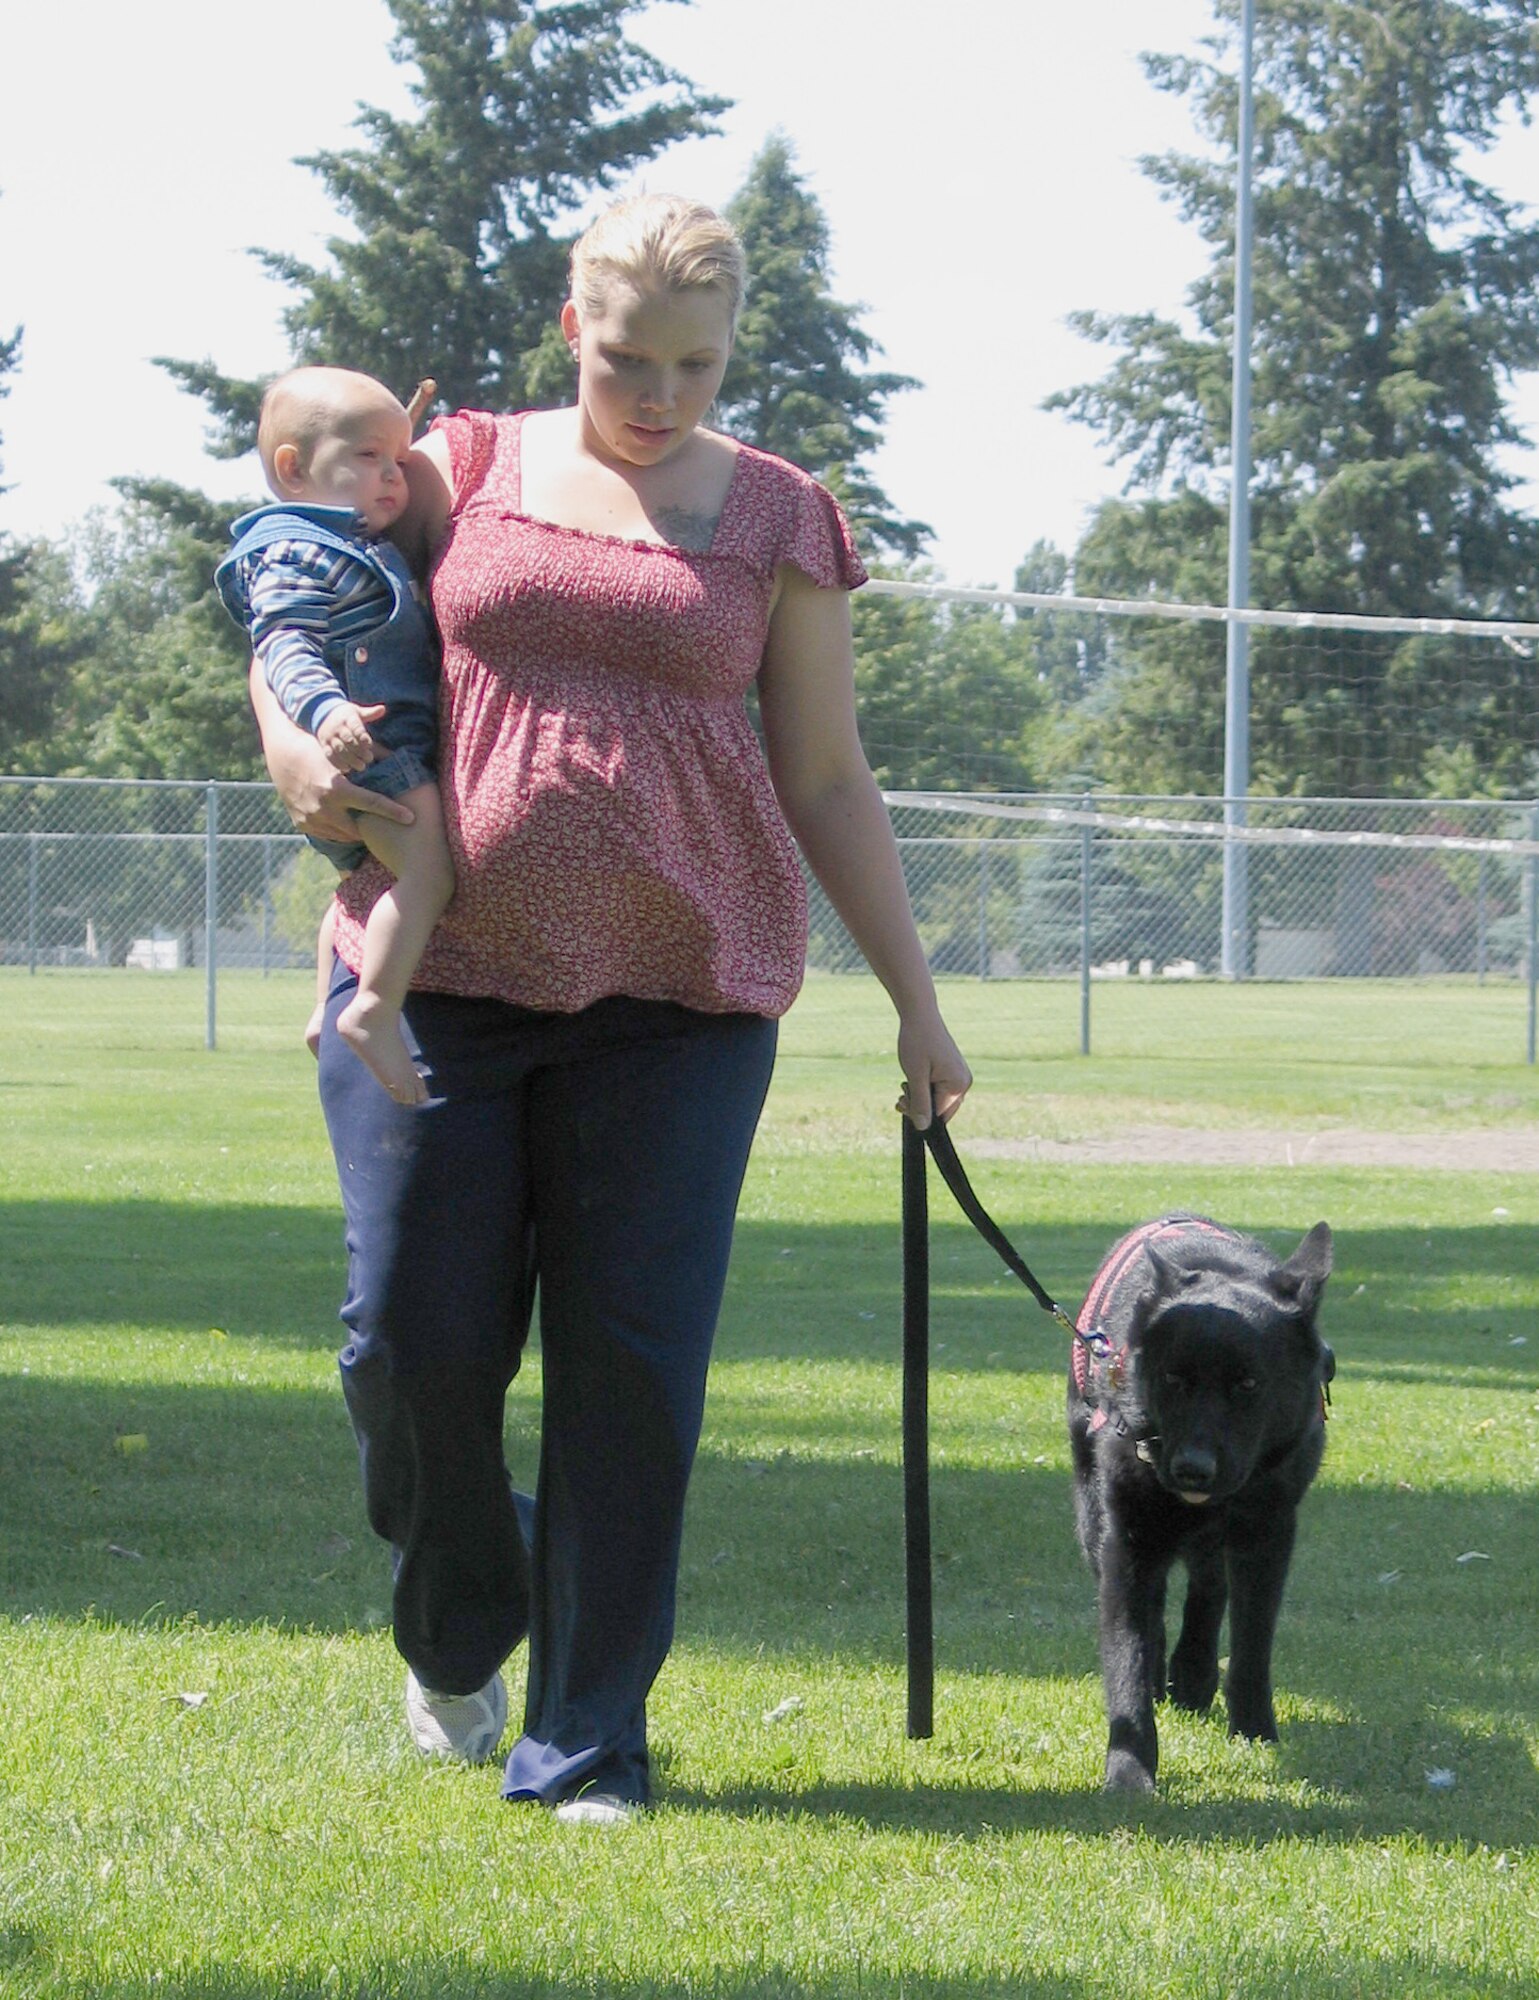 FAIRCHILD AIR FORCE BASE, Wash. – Kimberly Hawks walks with her son Jeremy, 14 months, and medical alert dog Zeuss at Miller Park here. Kimberly is married to Staff Sgt. Jeremy Hawks of the 92nd Civil Engineer Squadron explosive ordnance disposal unit, and they’re expecting their next child in August. Kimberly is in the process of training Zeuss for his medical alert duties, which include retrieving medications, waking Kimberly up and calling her attention to upcoming medical situations. (U.S. Air Force photo/ Staff Sgt. Connie L. Bias)